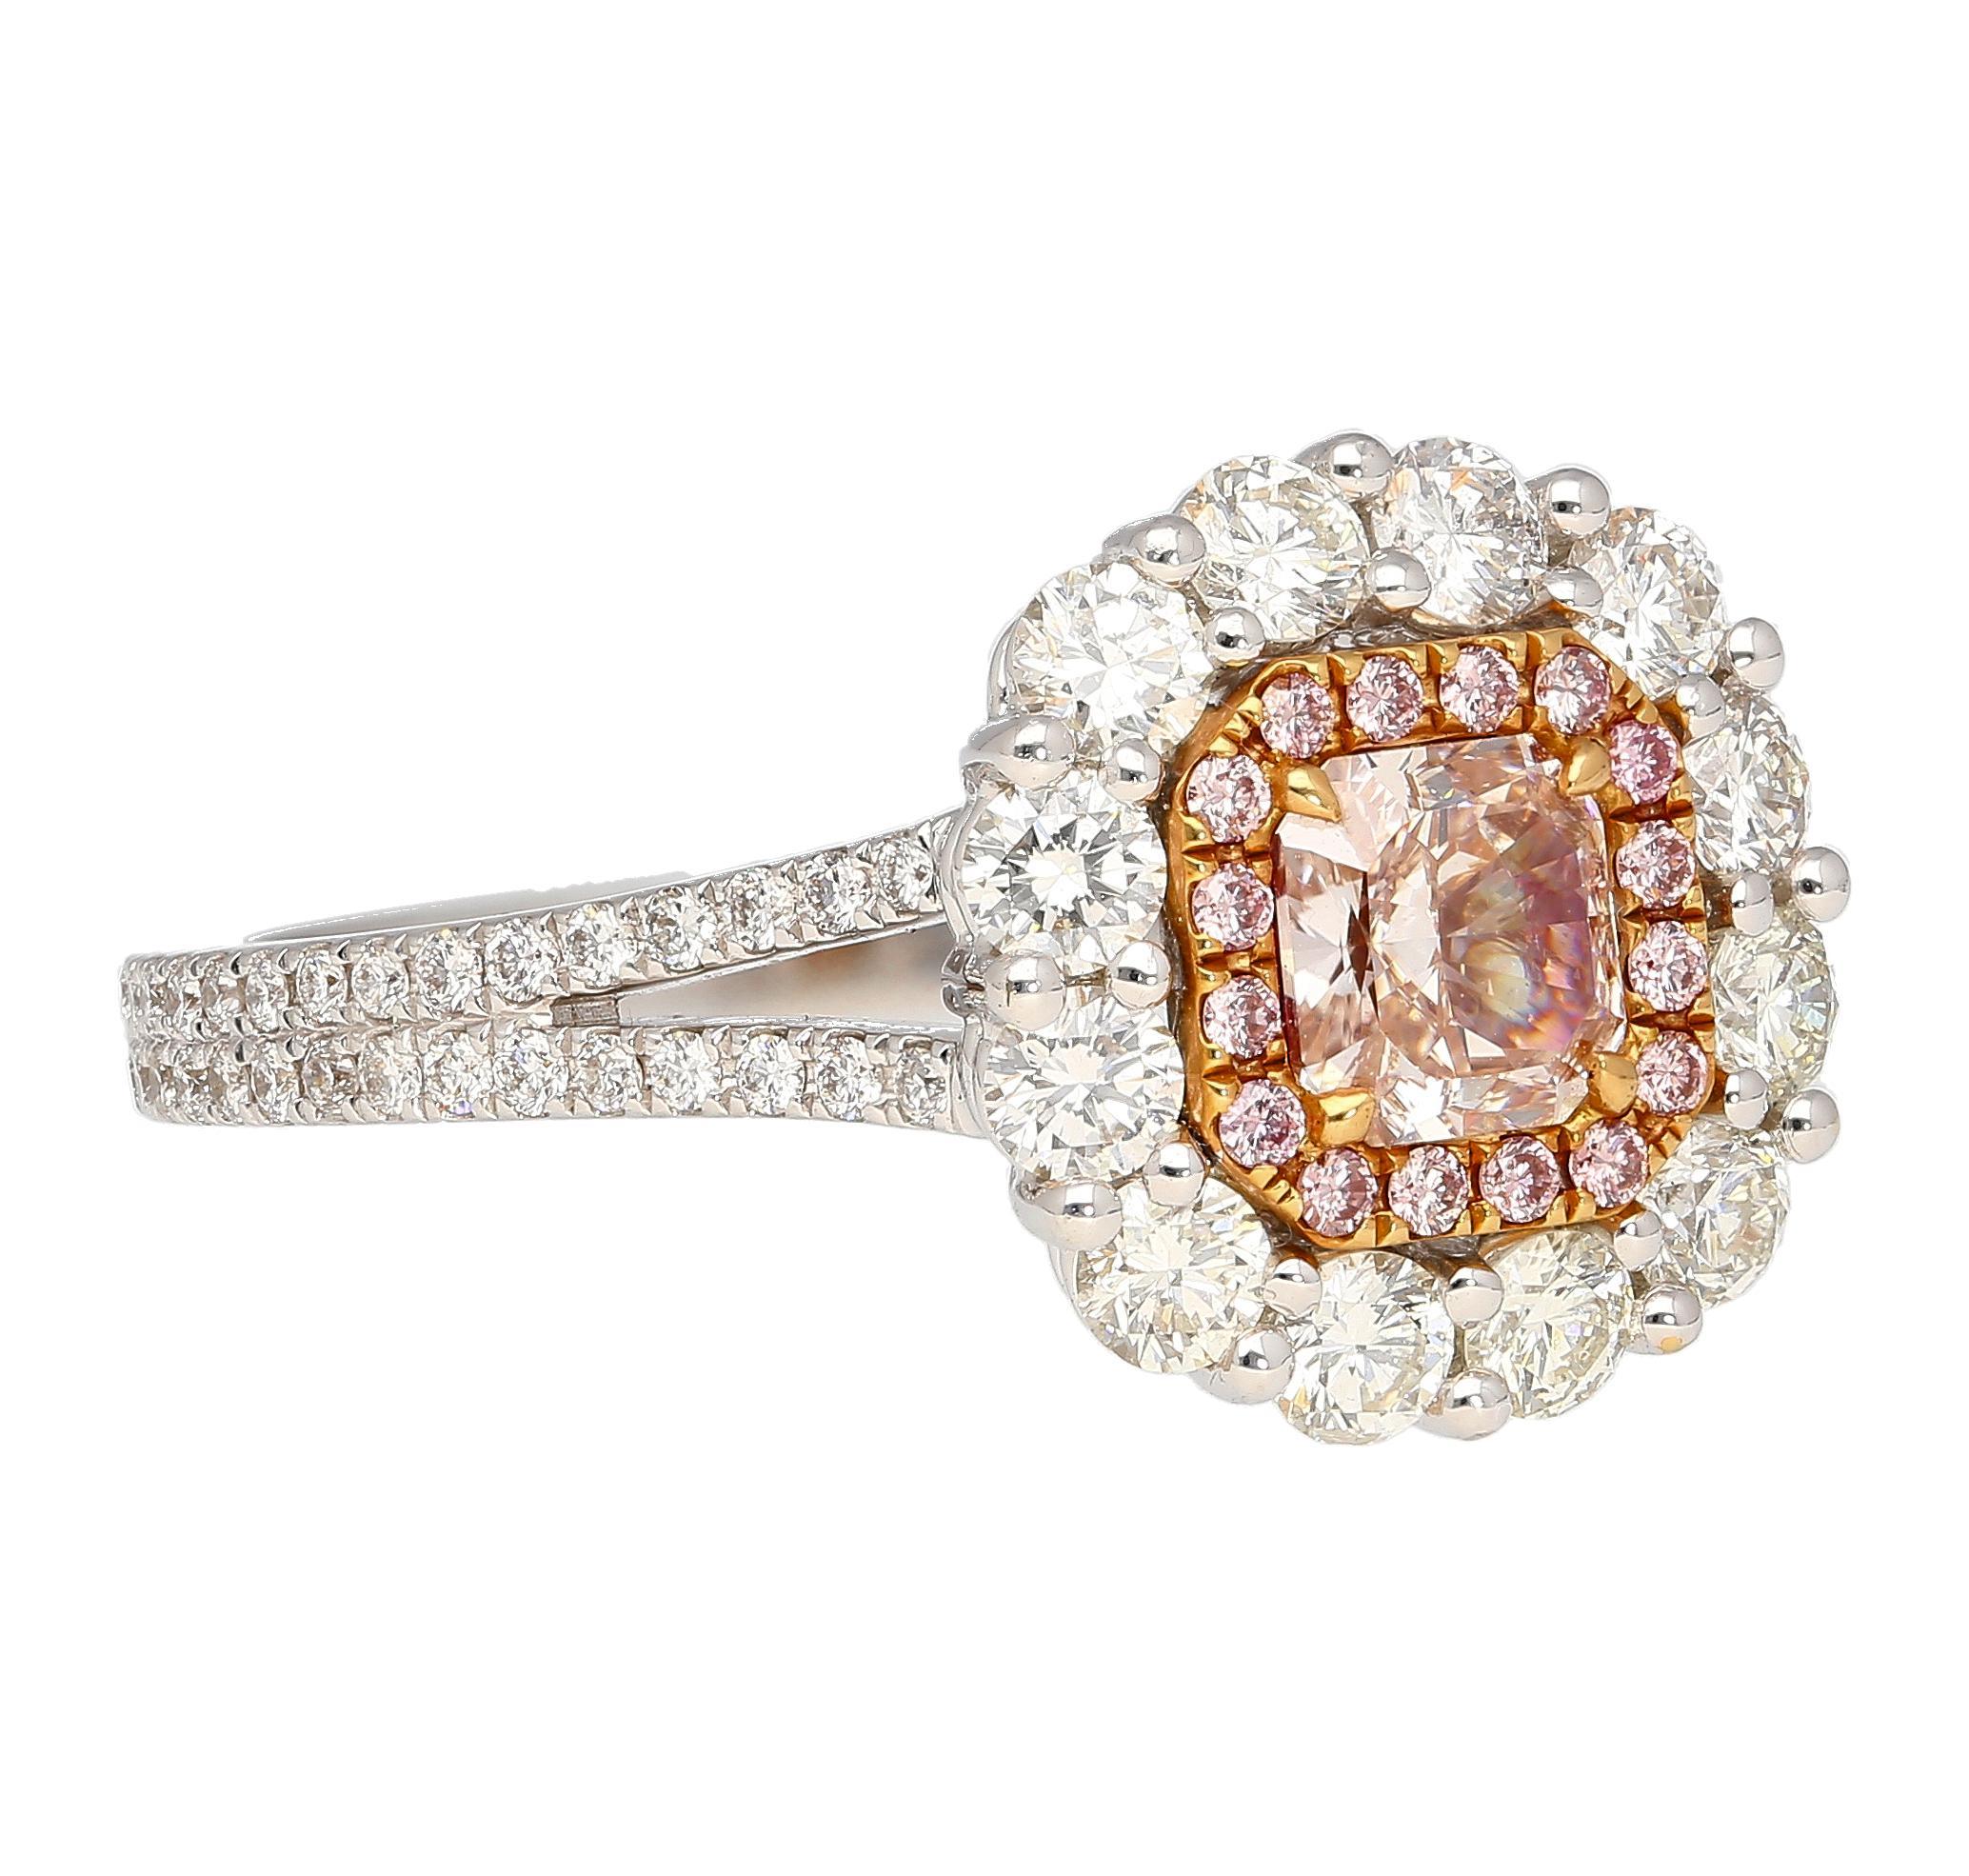 Radiant Cut GIA Certified 1.51 Carat Fancy Light Brown Pink Internally Flawless Diamond Ring For Sale